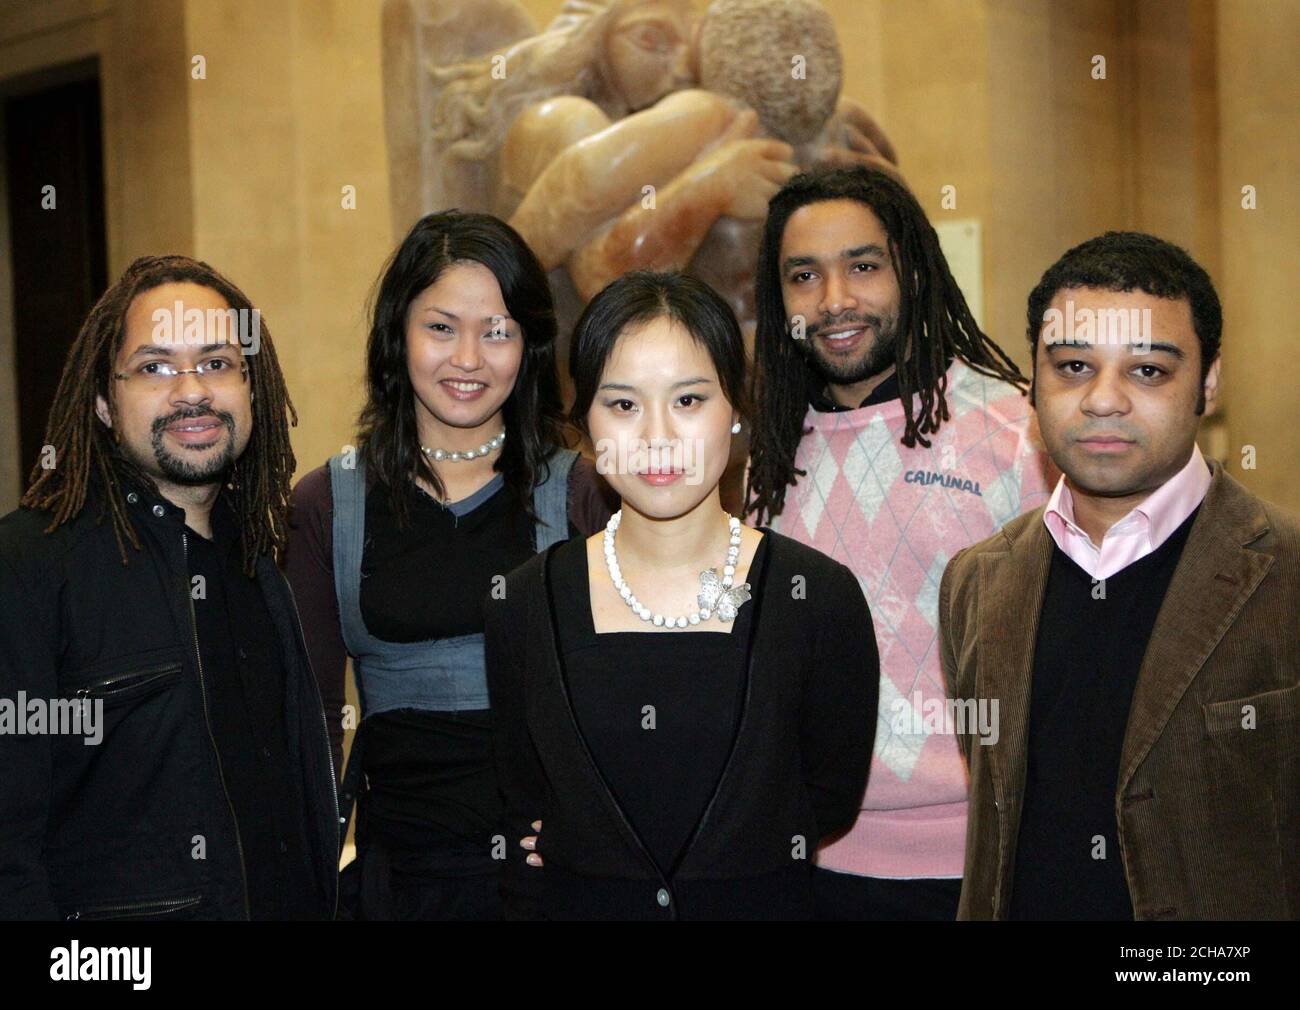 Picture shows the first five 'Fellows' selected by the Arts Council of England for their 'Inspire' scheme, designed to recruit more Black & Asian curators in britain's museums. (L-R) Jonah Albert, Ligaya Salzar, Gina Ha-Gorlin, Eddie Otchere and Cedar Lewisohn, from the Tate Britain, central London, Wednesday 7 December 2005. PRESS ASSOCIATION Photo. Photo credit should read: Mark Lees/PA Stock Photo